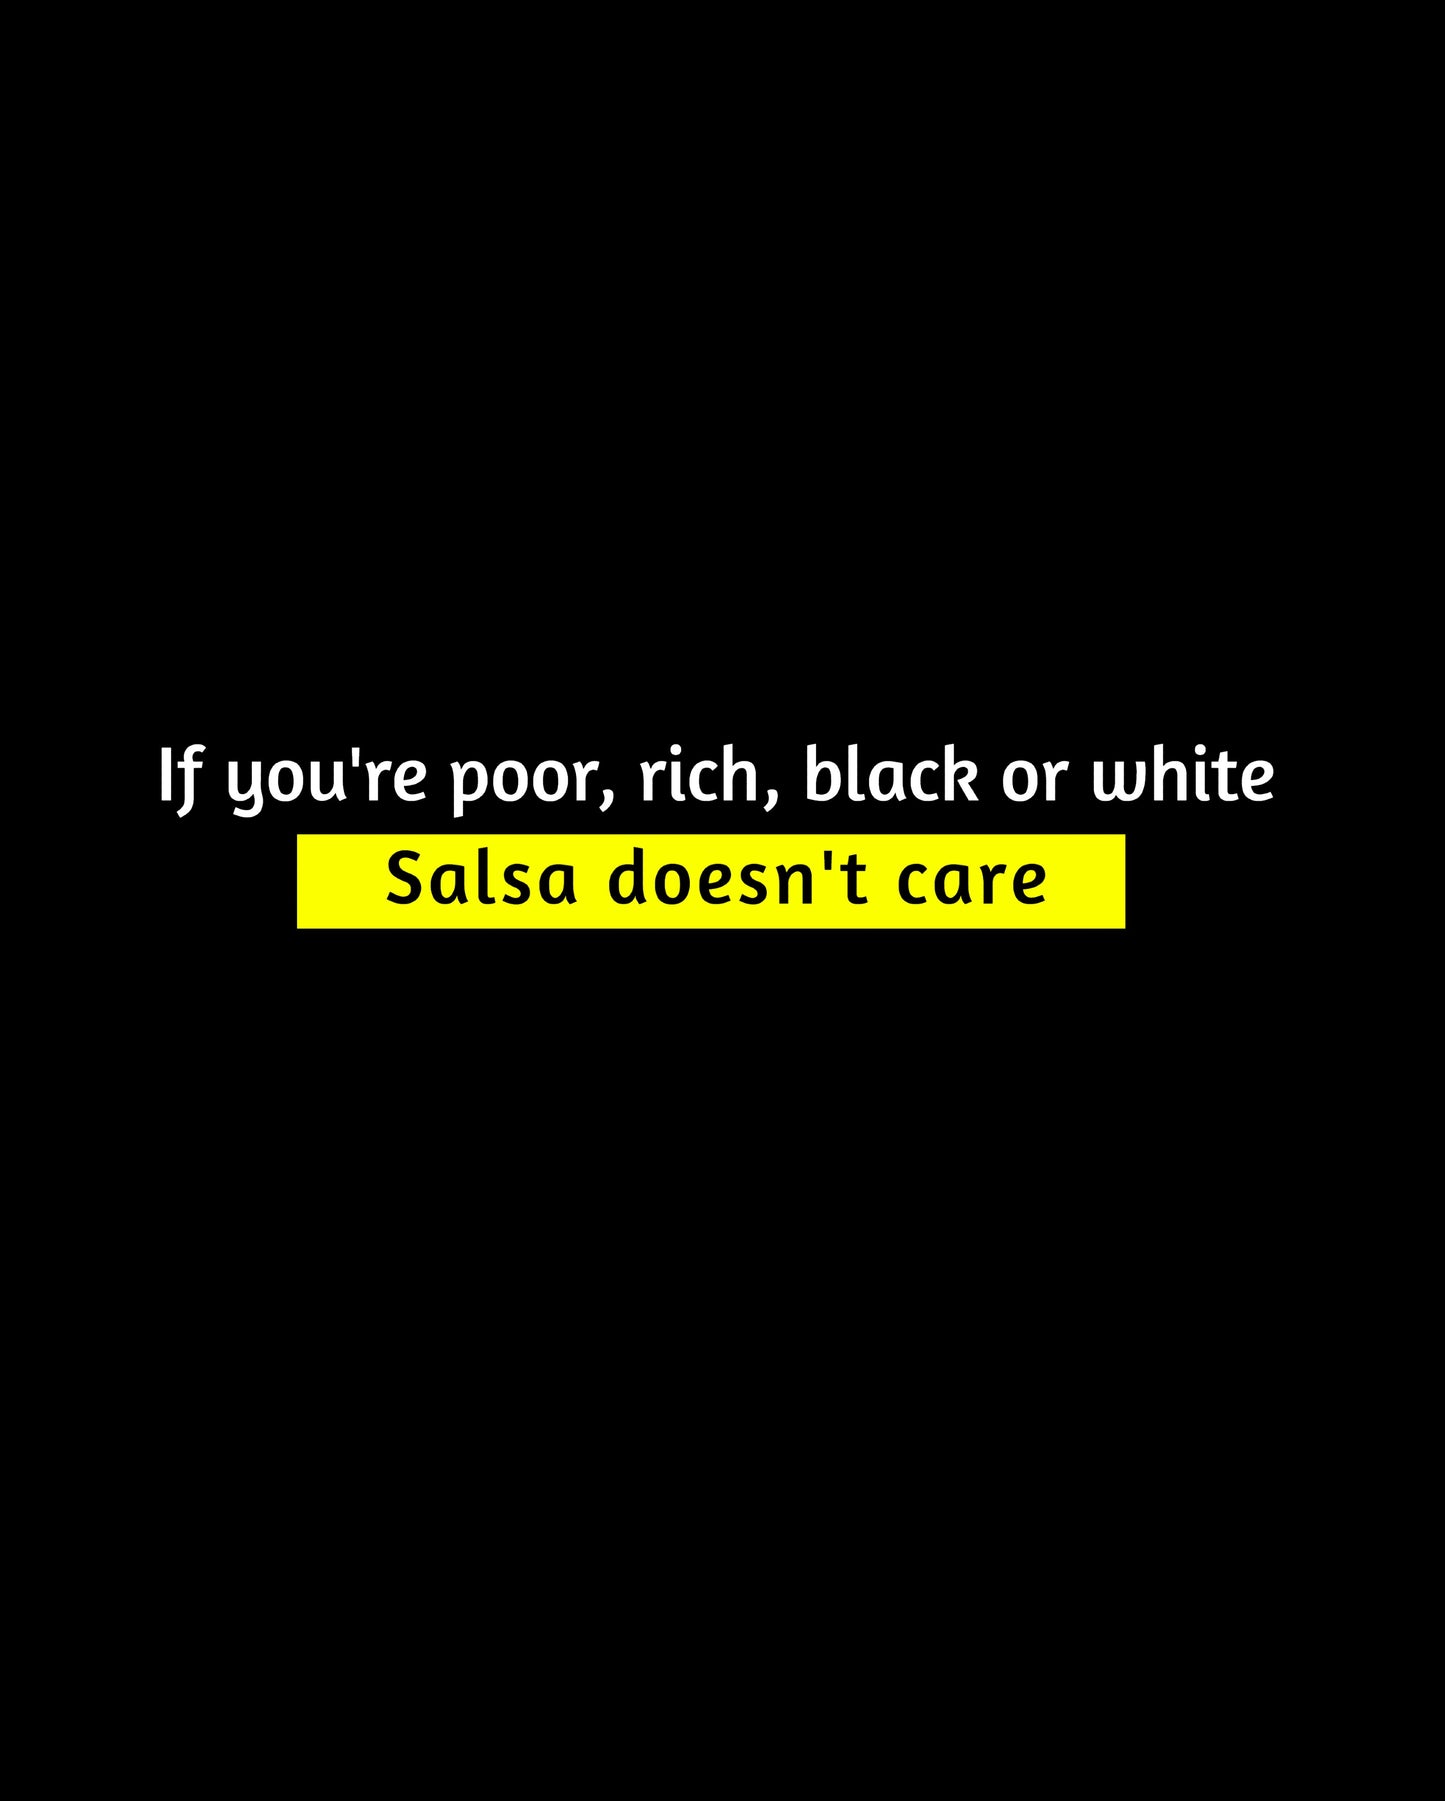 Salsa doesn't care